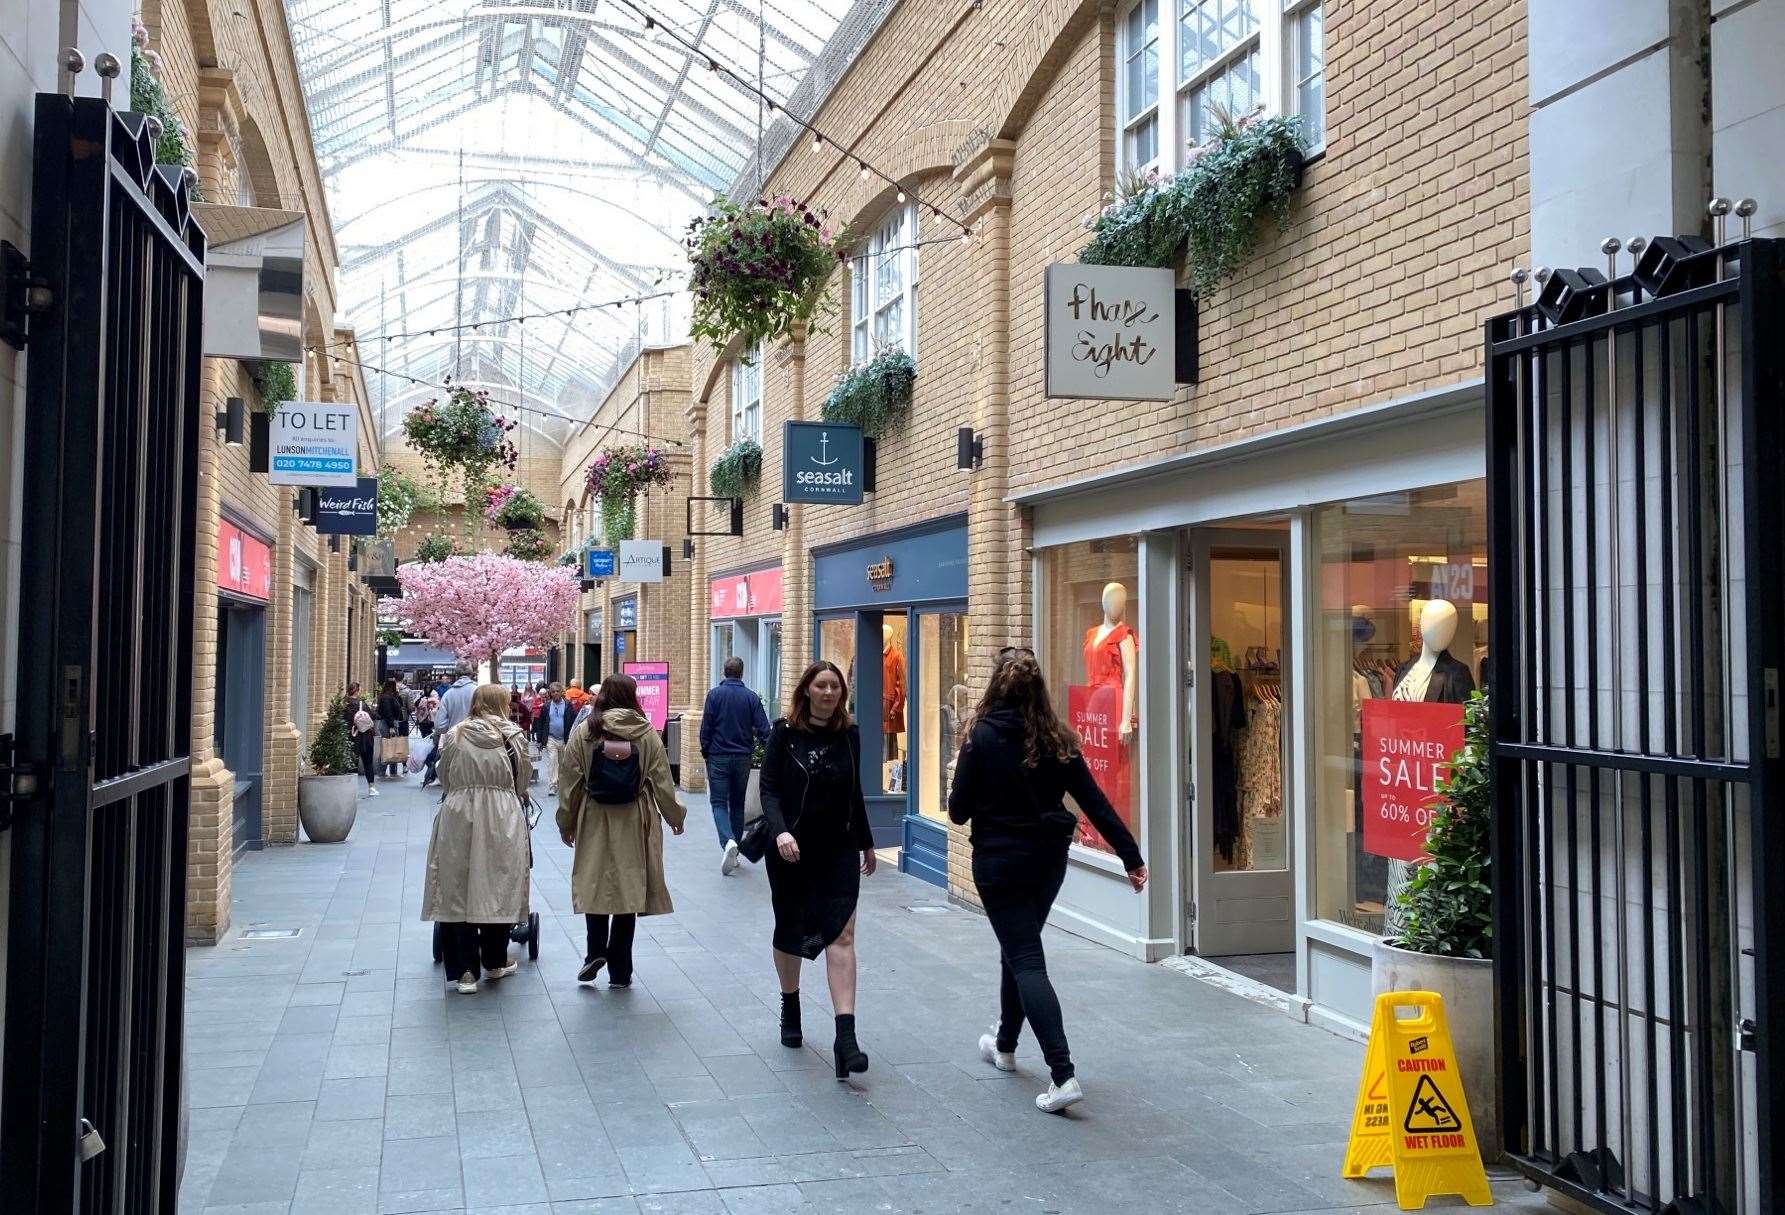 Whitefriars shopping centre is owned by the council